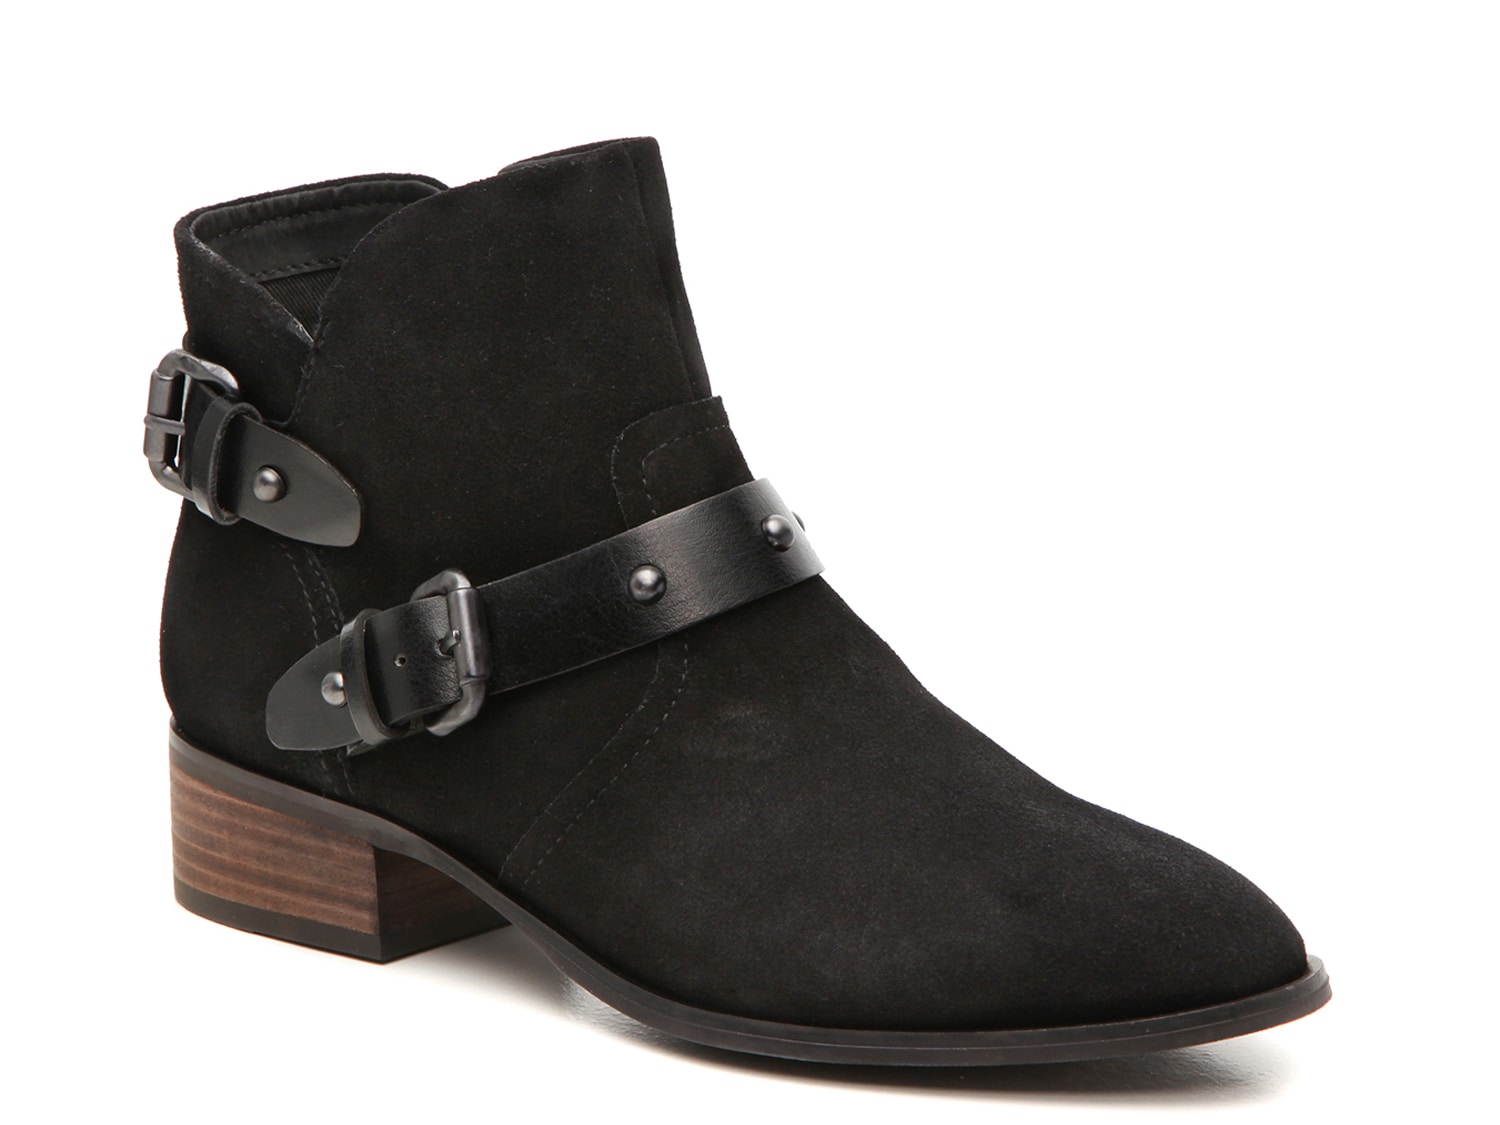 women's leather boots clearance